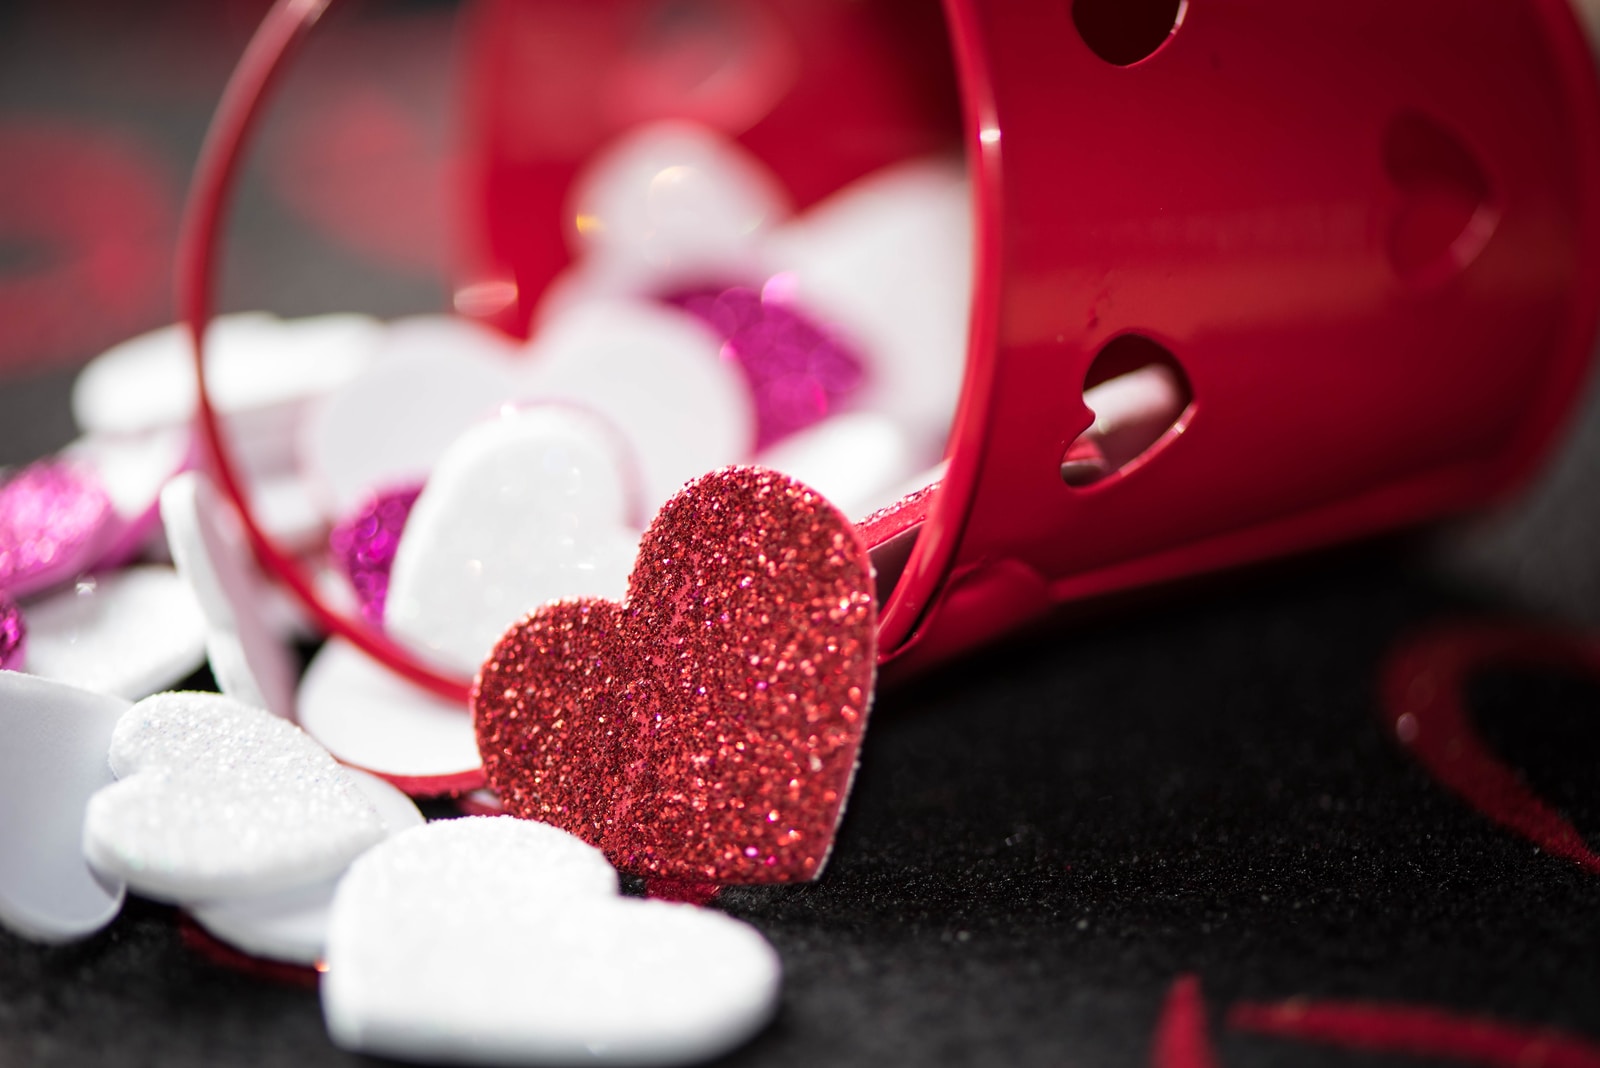 heart decors poured on red bucket